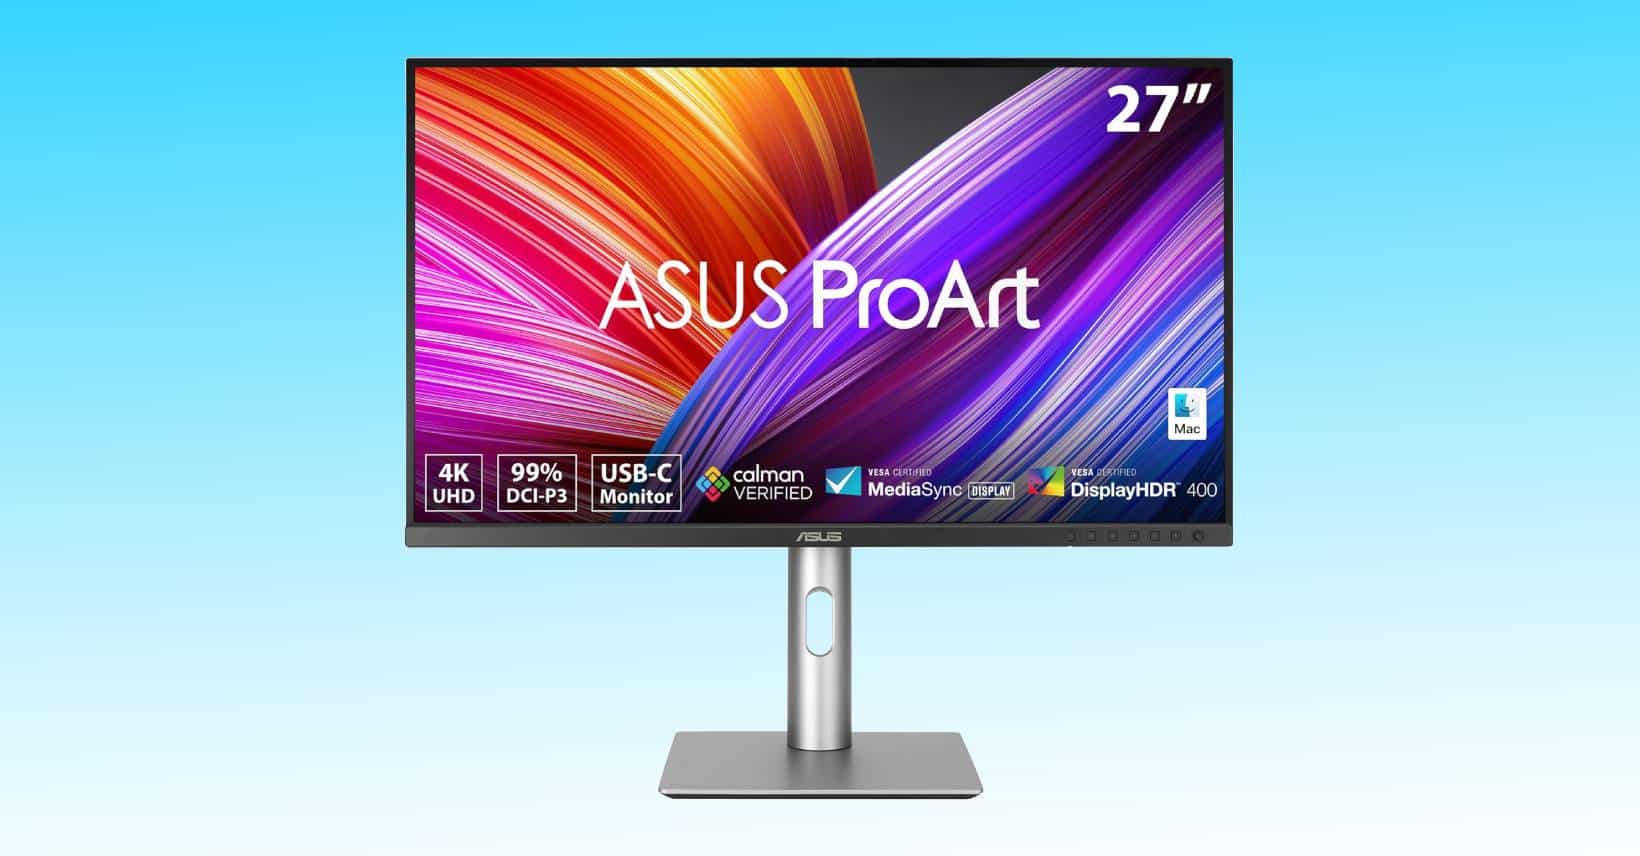 Black Friday deal sees the 27 inch ASUS ProArt Display take a big